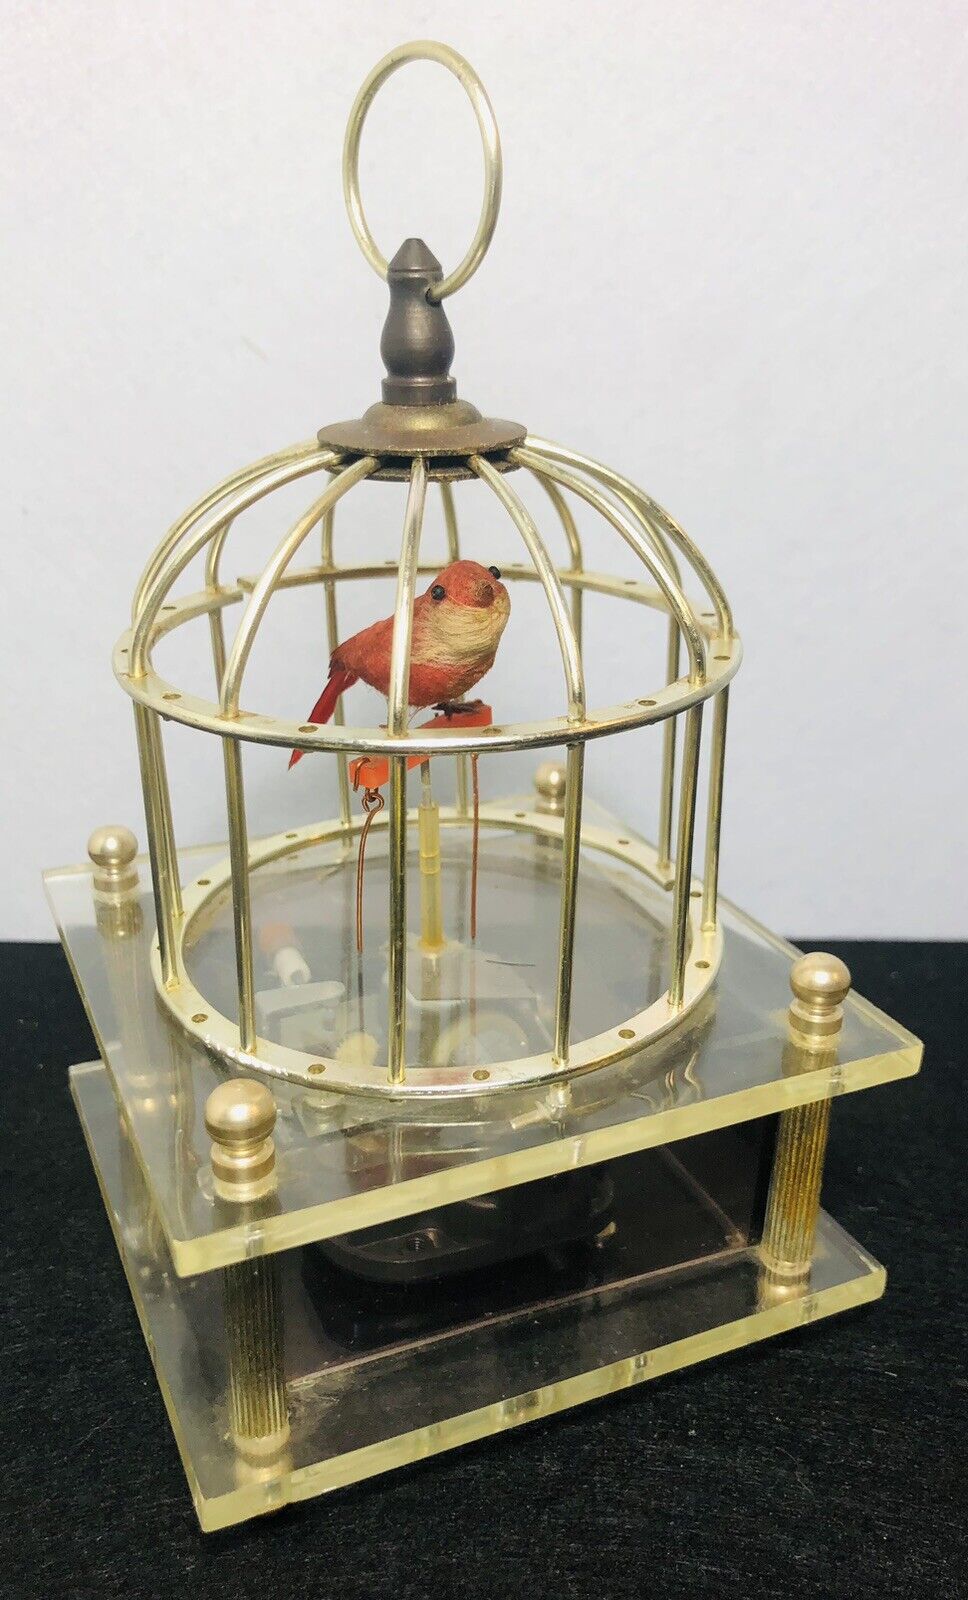 SANKYO Automaton Bird in Cage Music Box WORKS Made in Japan Wind Up(b4)